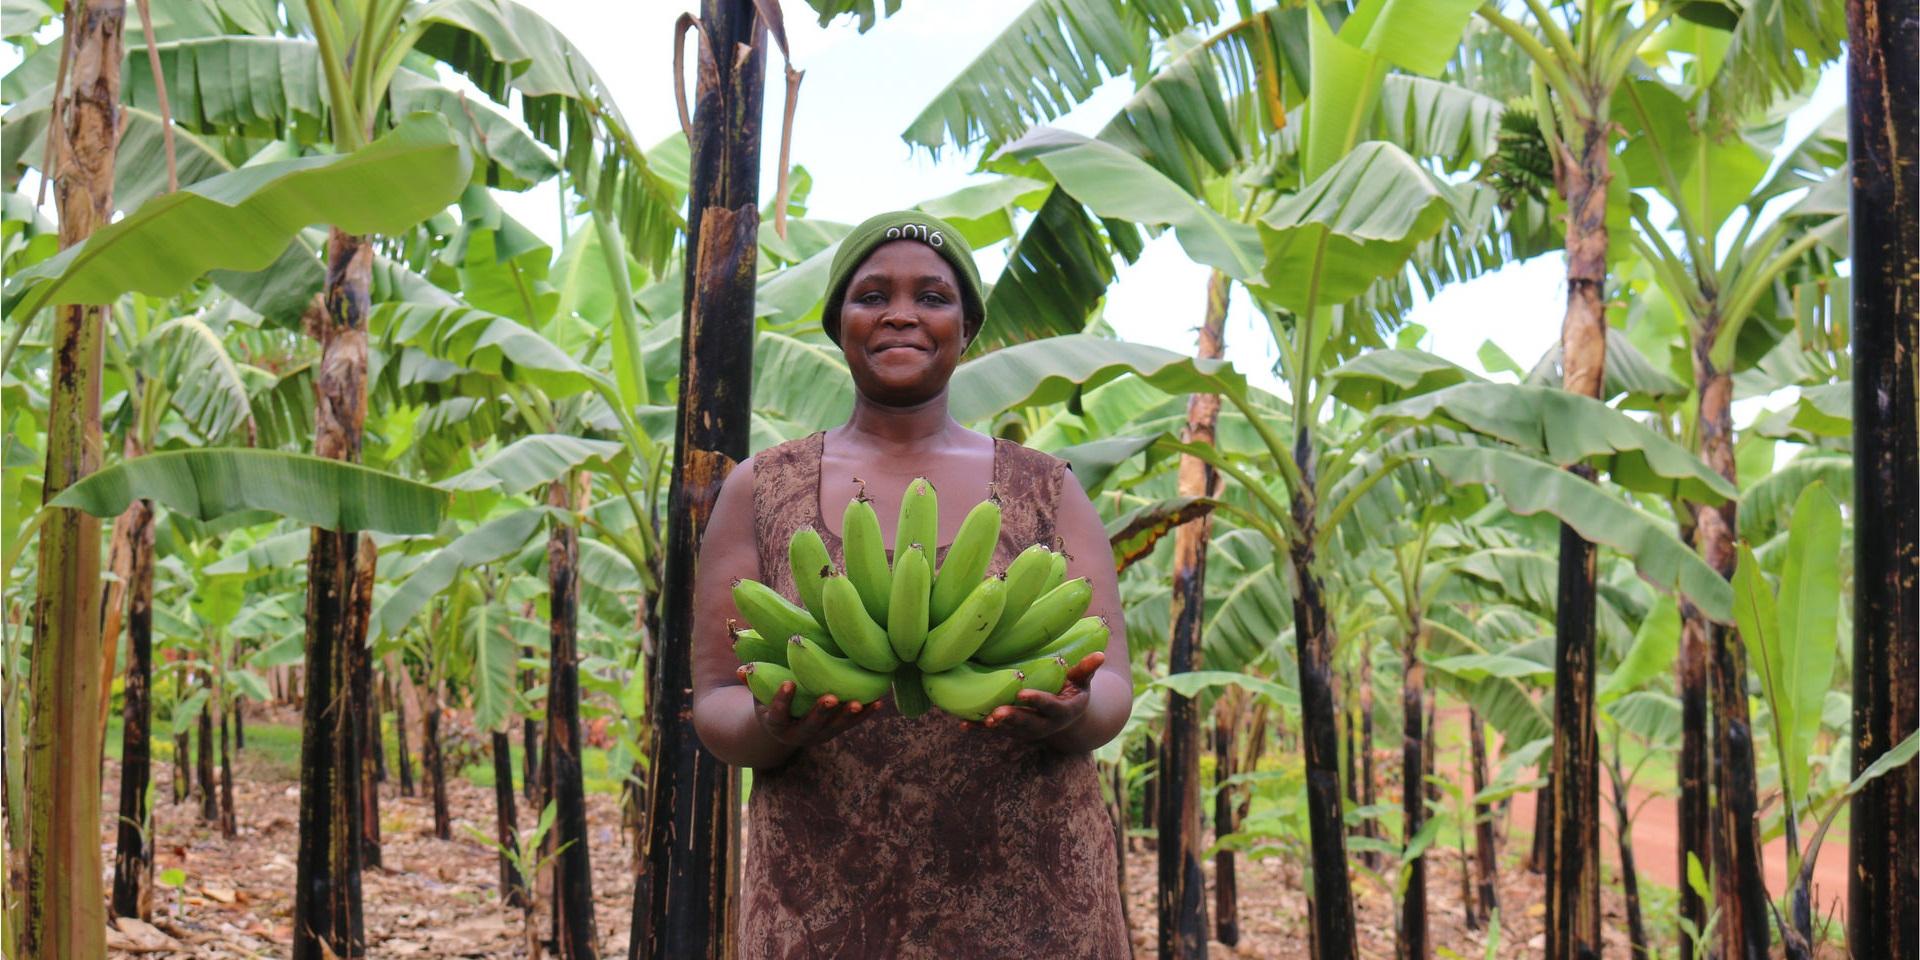 A smiling woman stands in her banana plantation holding green bananas in her hands